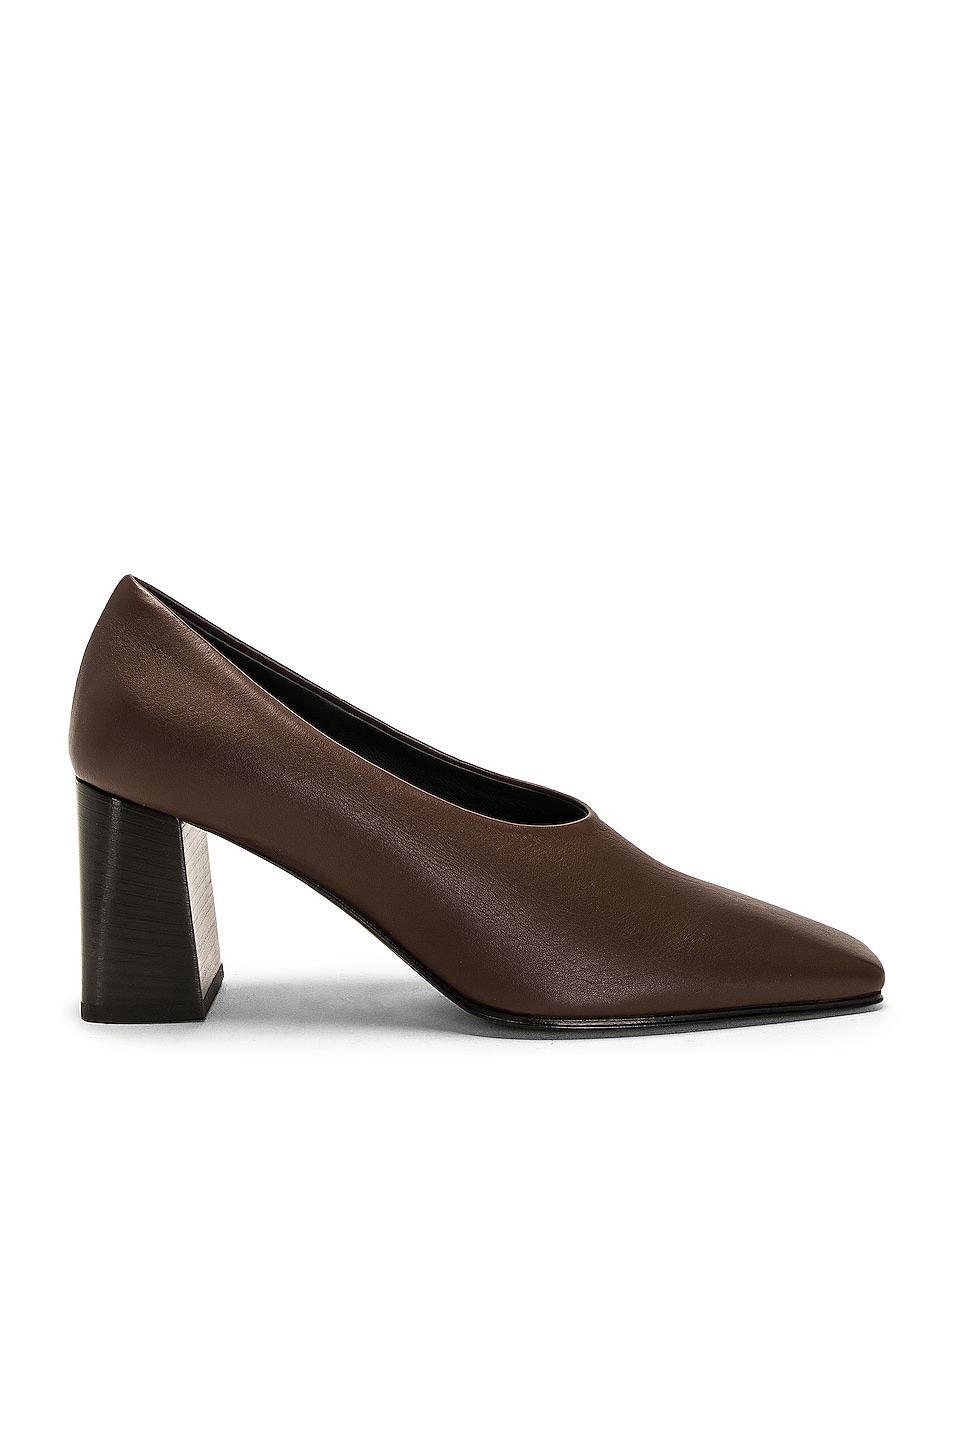 Image 1 of The Row Square Loafer Pumps in tan